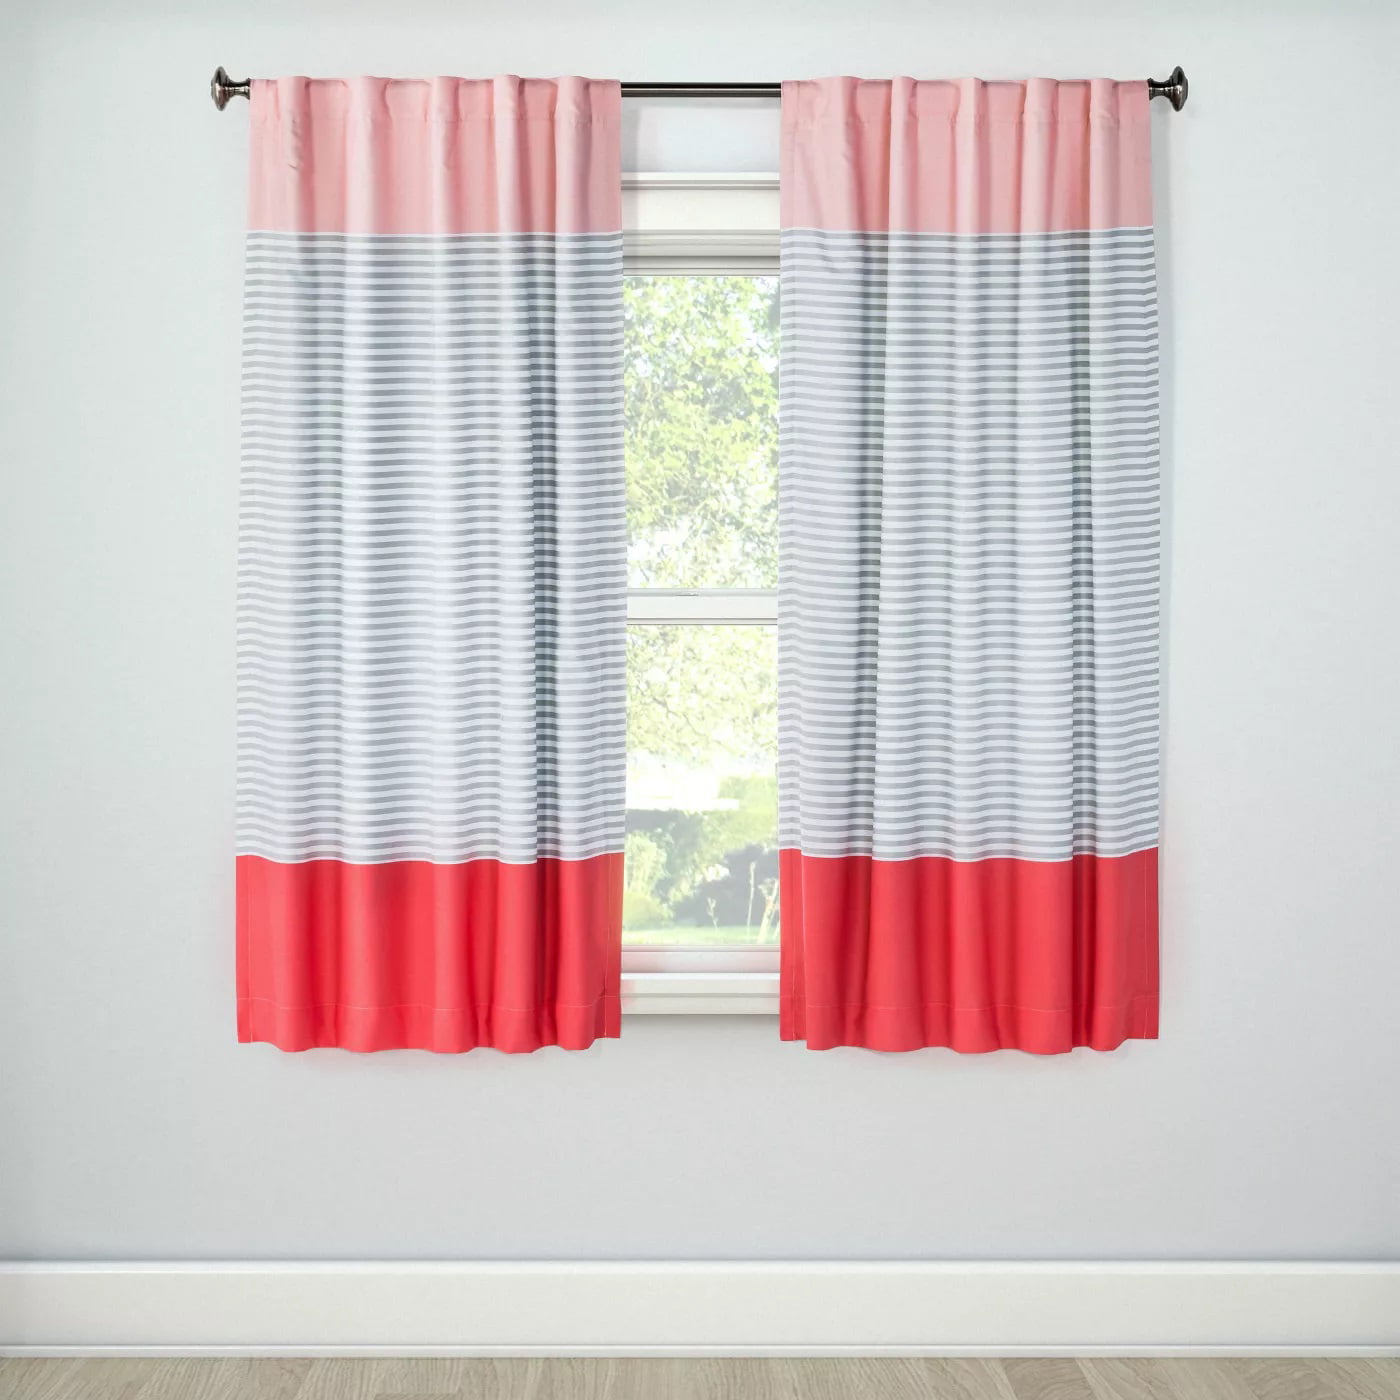 Details about   Pillowfort Blackout Curtain Pink and White Striped 42" X 84" Single Panel